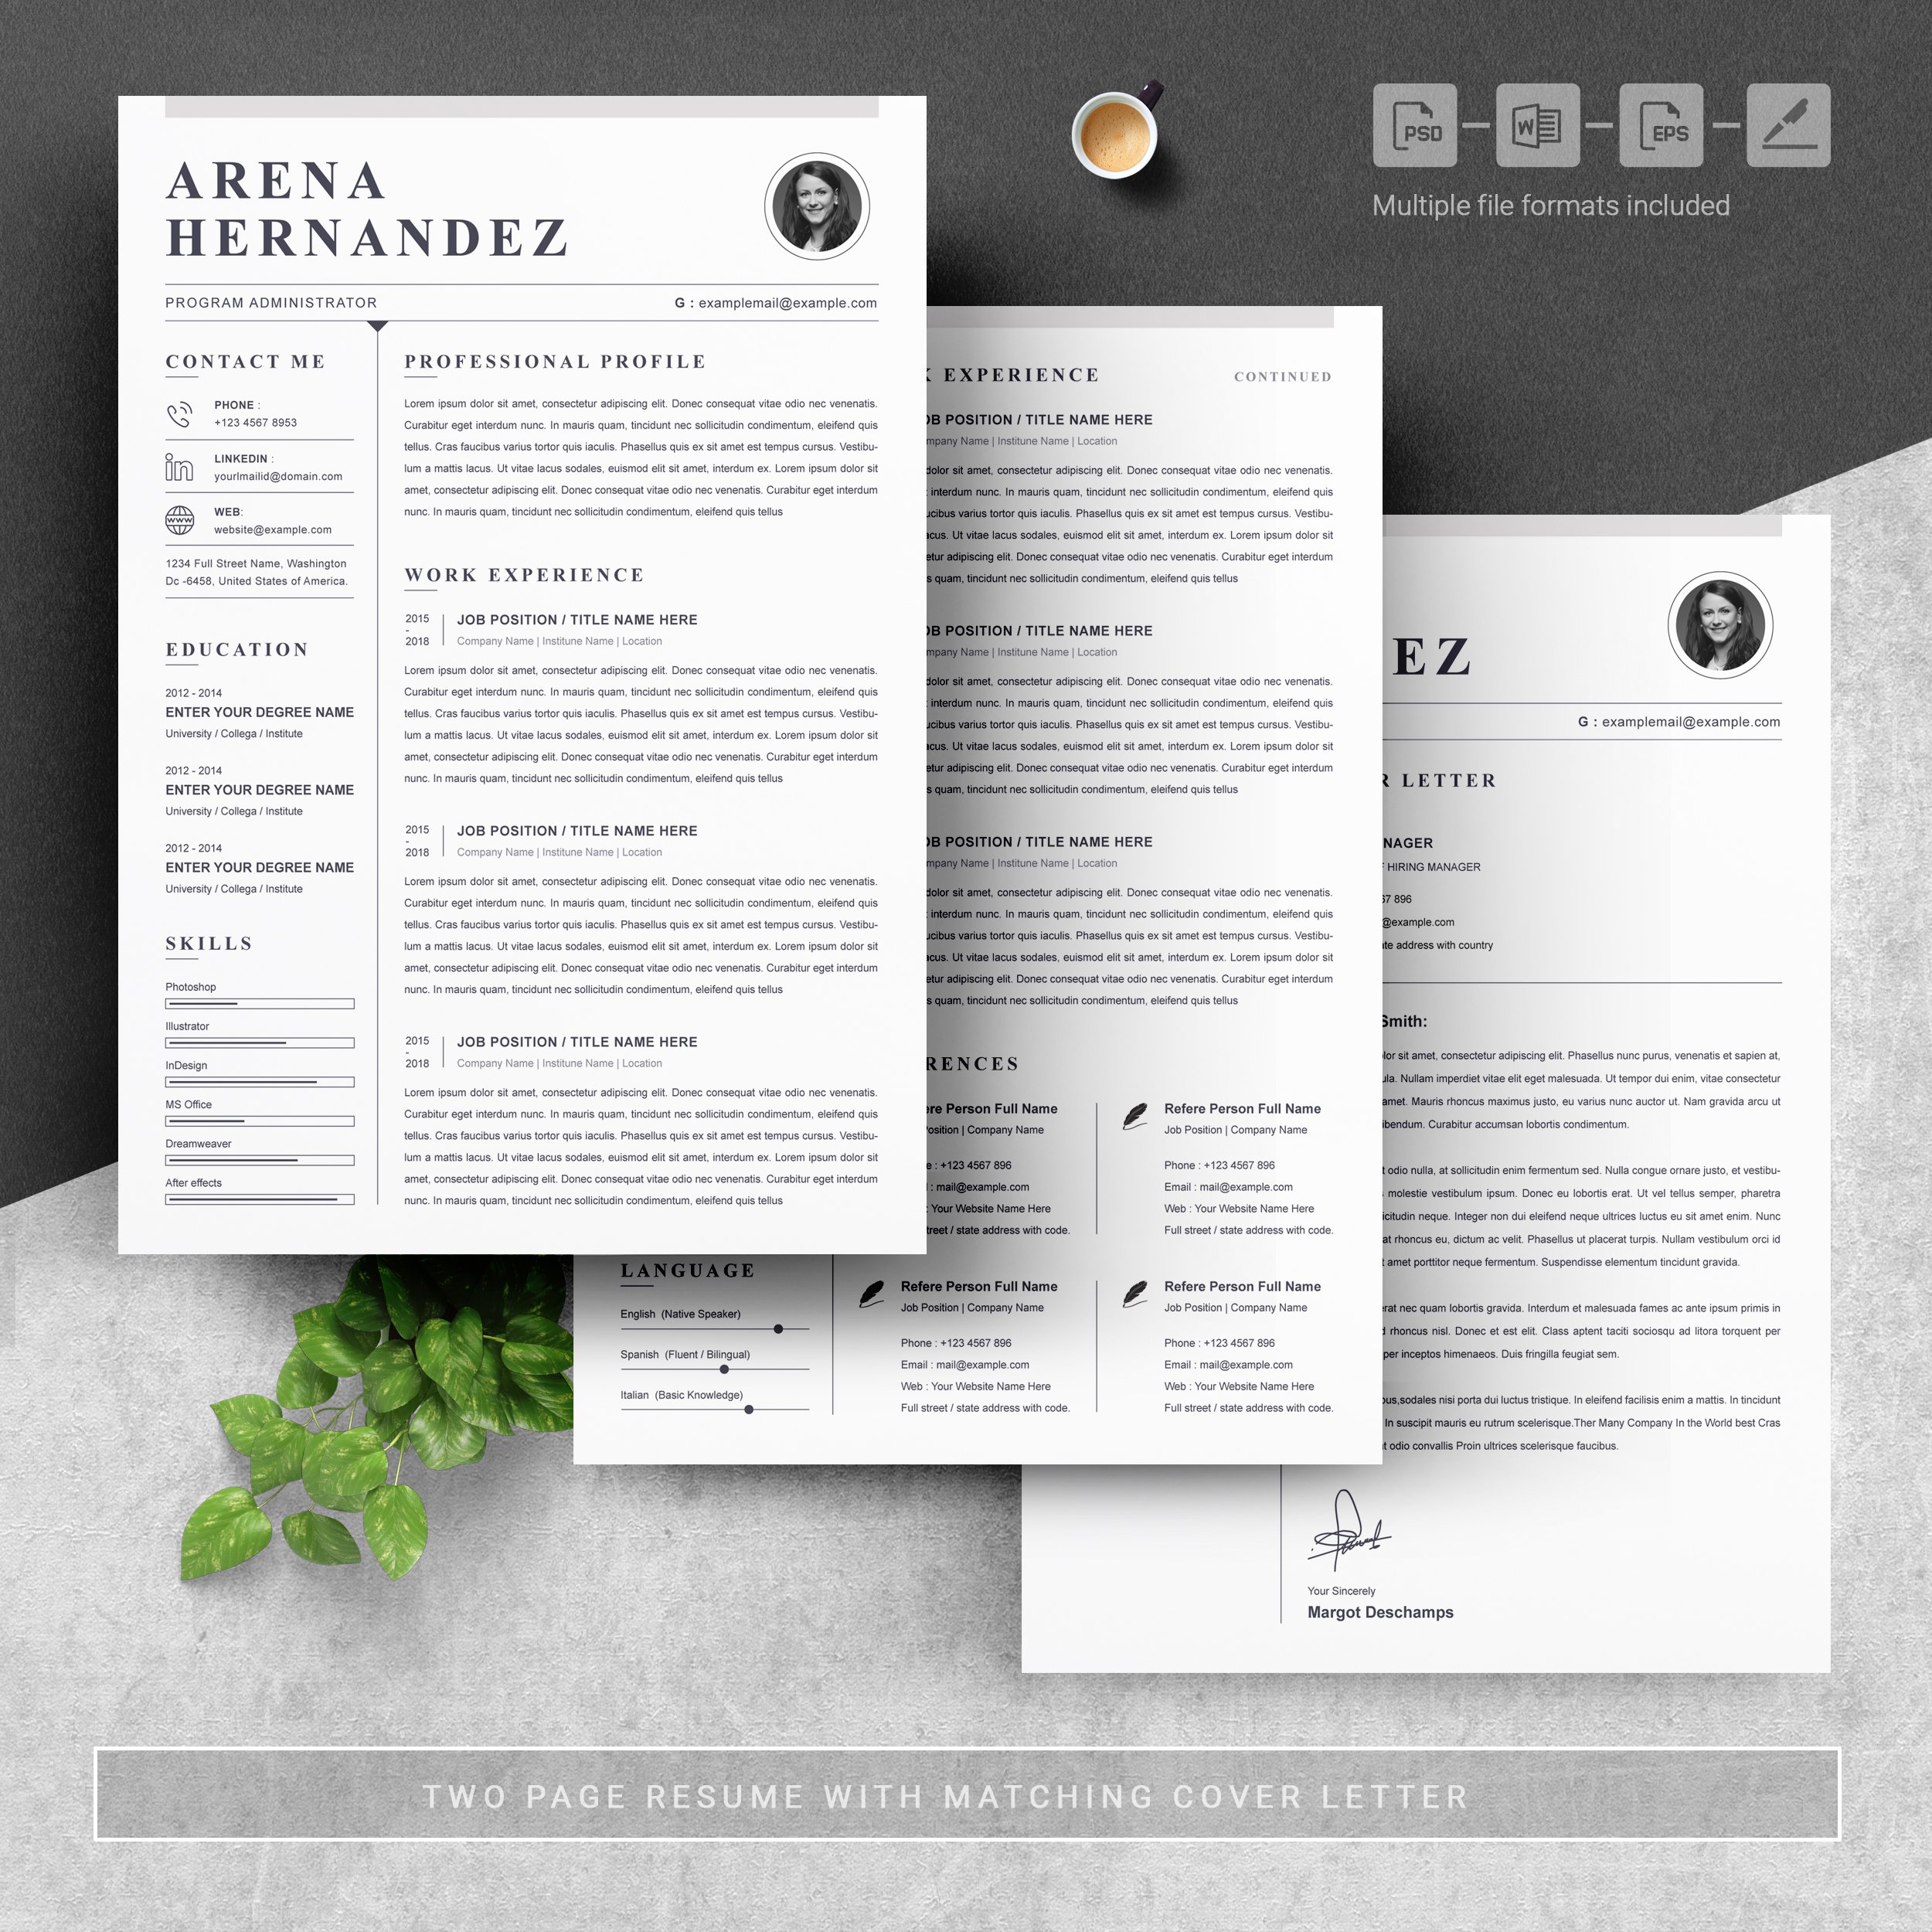 04 3 pages free resume design template 591